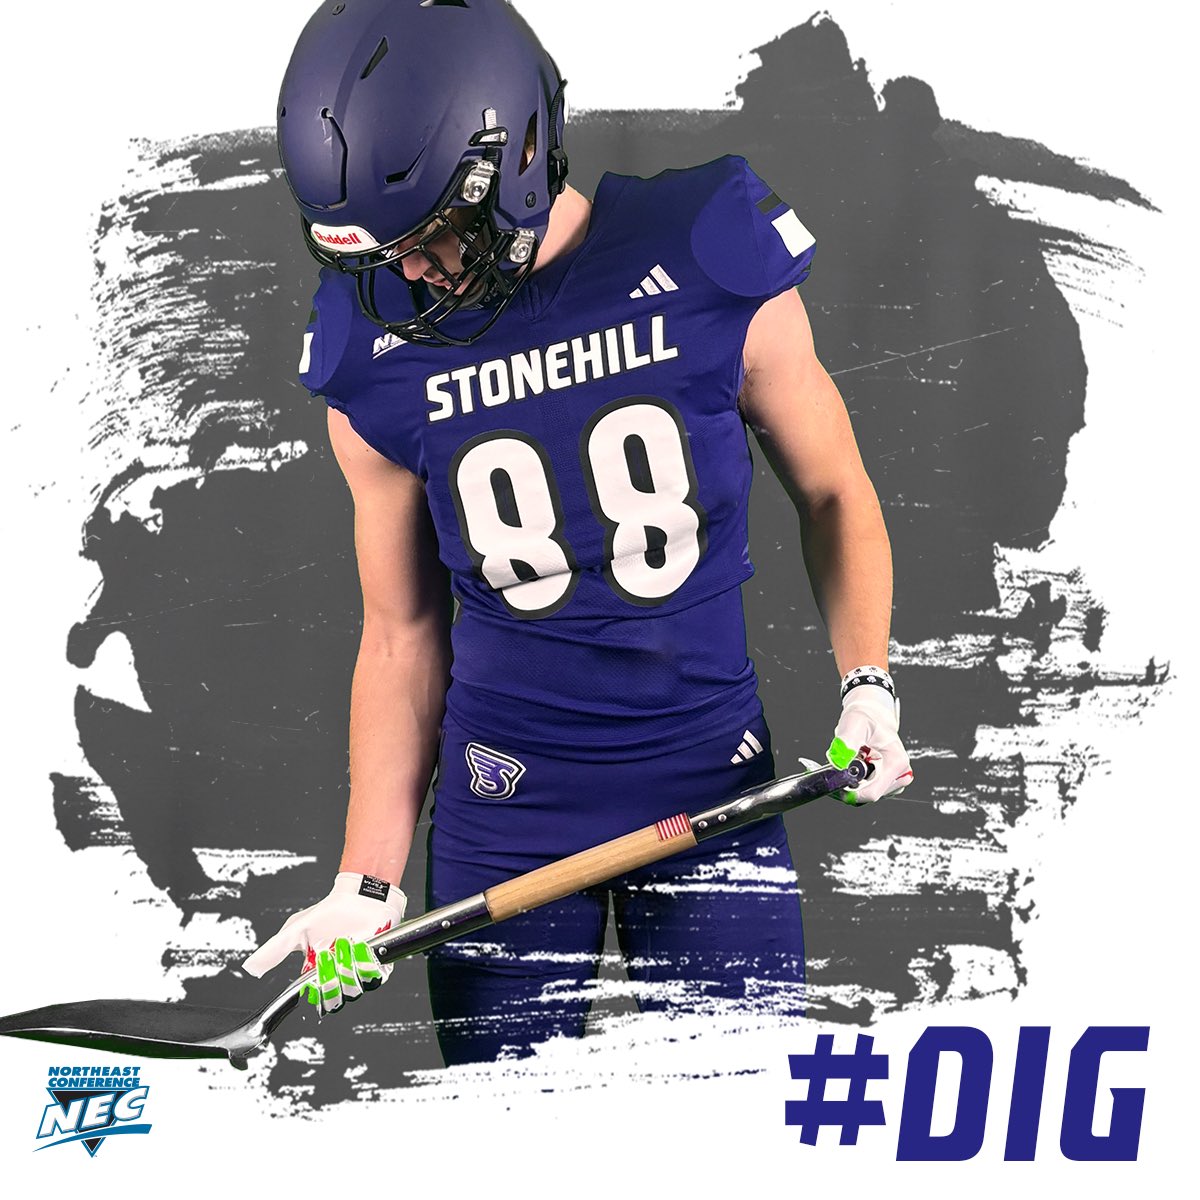 Juiced up to welcome a DUDE from NH, @Ksheridan026 is coming to #ShovelTown! #NSD24 | #DIG